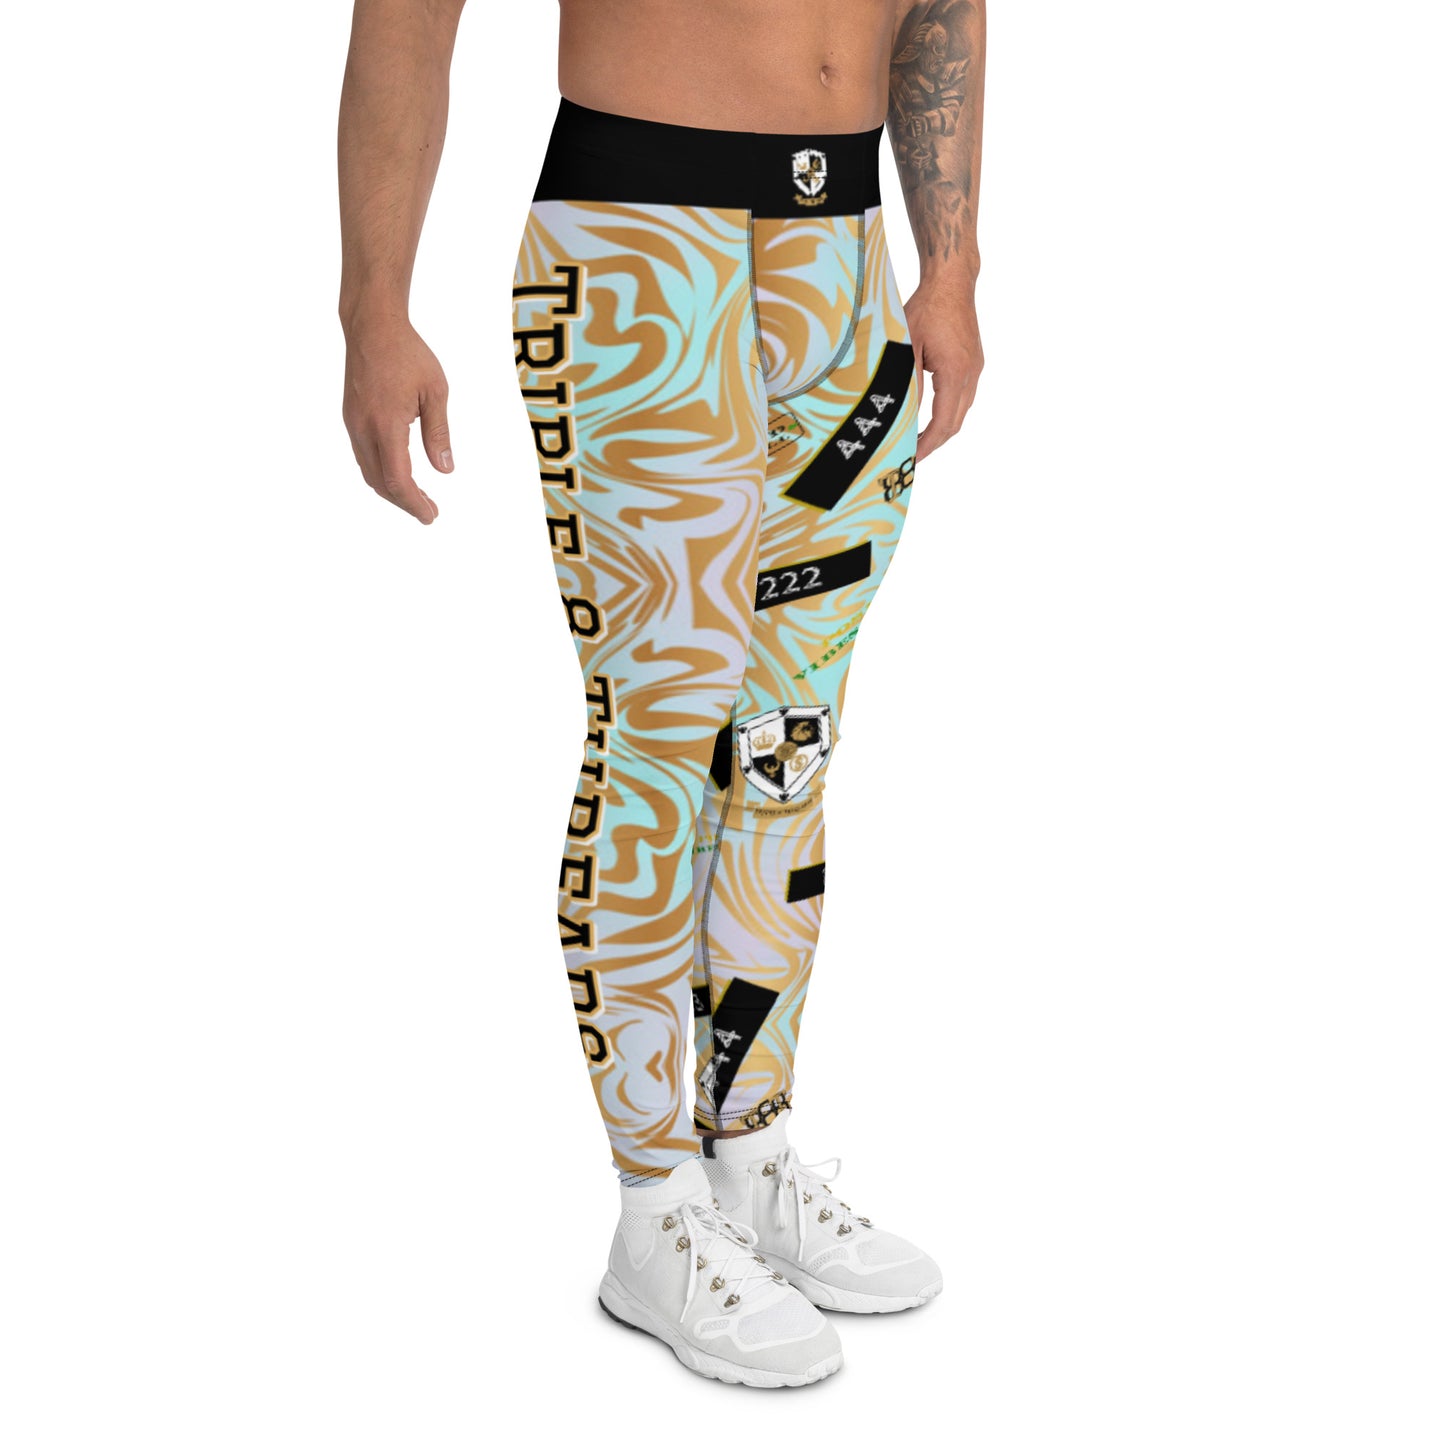 8xquiZit Collection - Pynk N Turq Jungle Luv  Men's Leggings